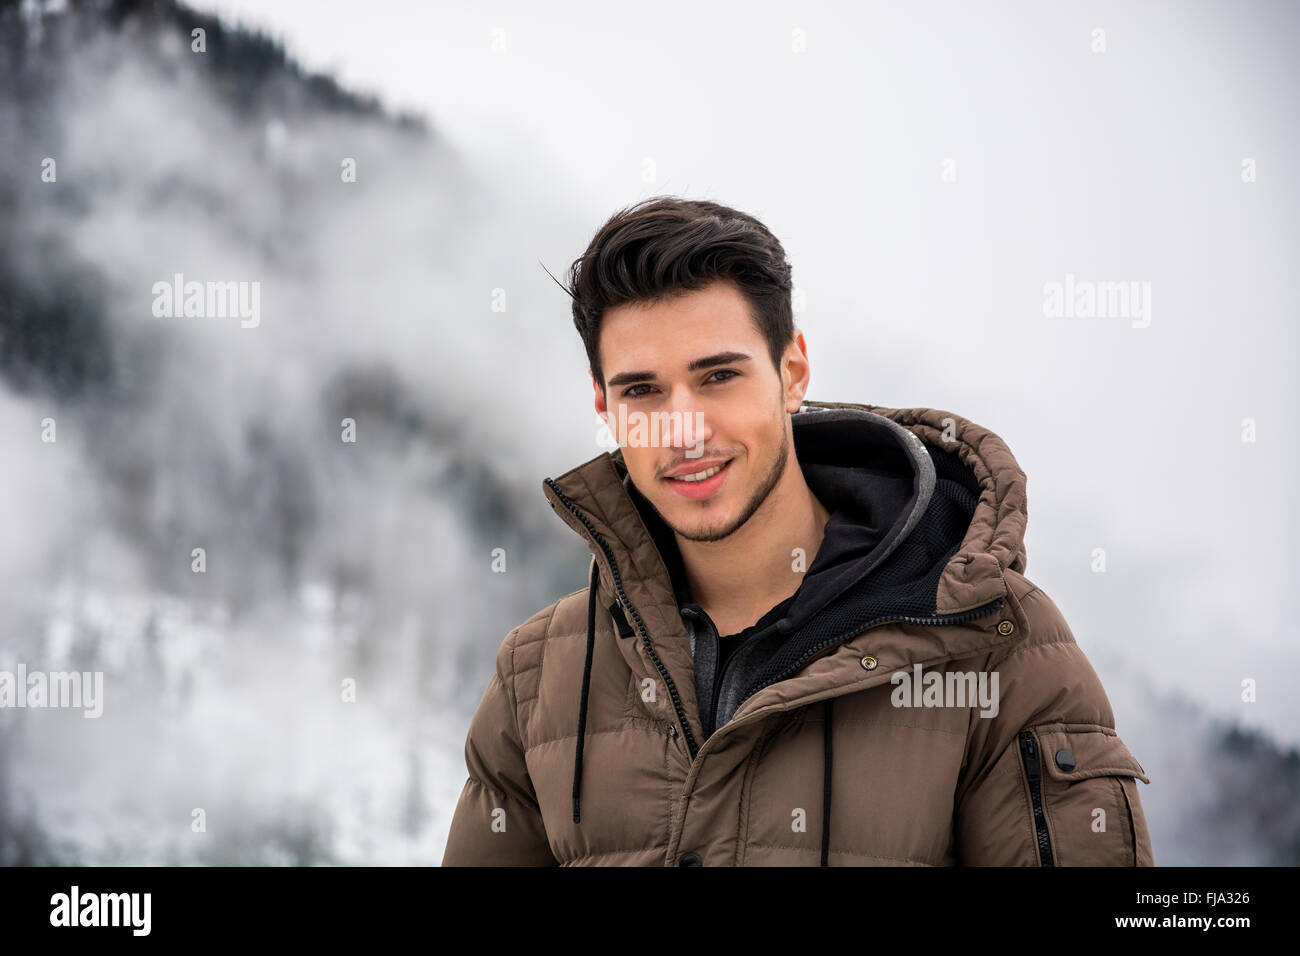 Handsome man in outerwear sitting while looking at camera. Snowy landscape on background Stock Photo